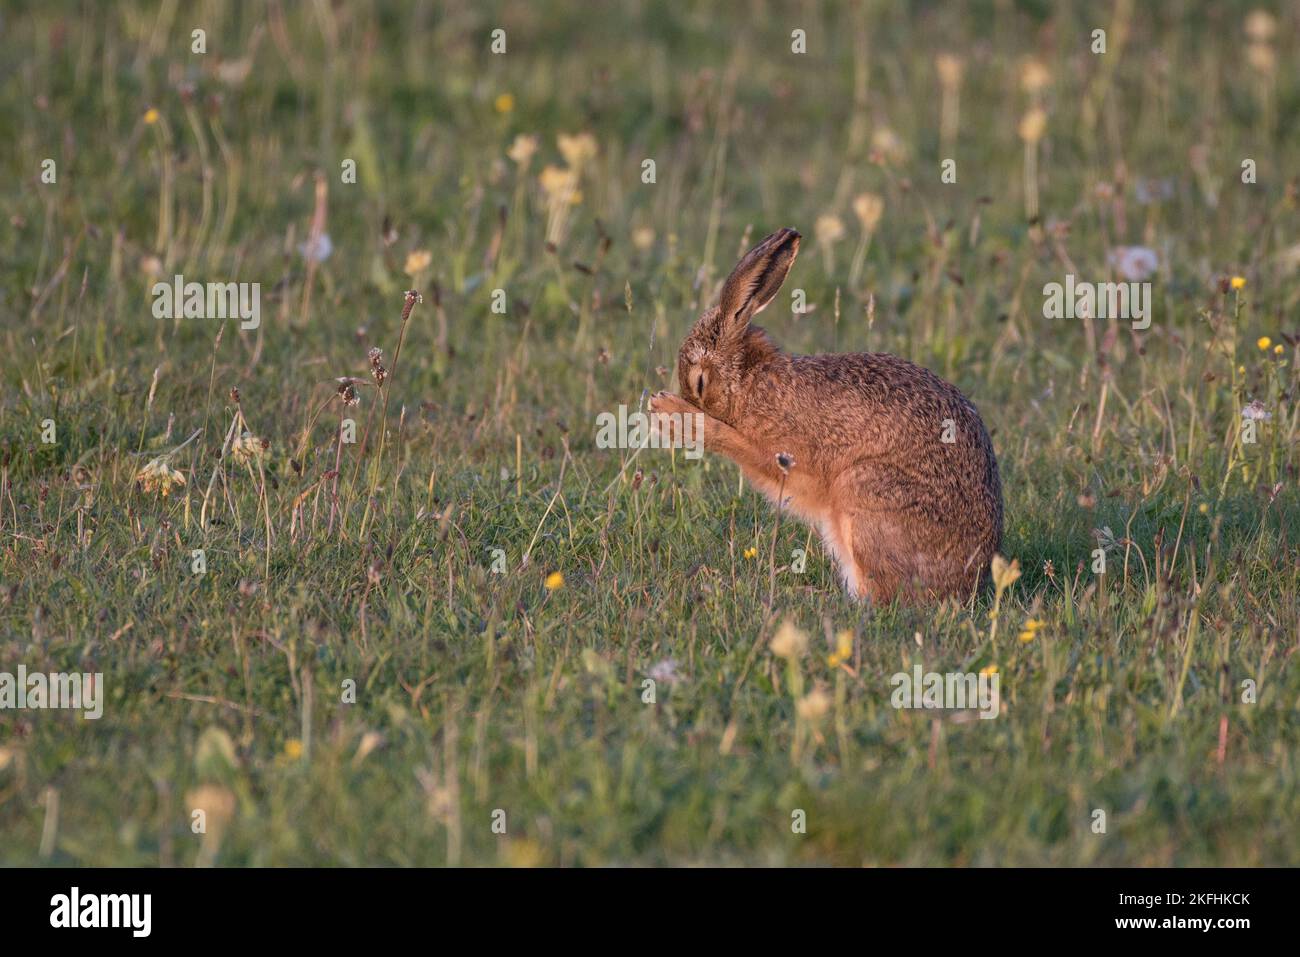 Brown hare in a meadow field washing his face and looks like he is praying. Stock Photo